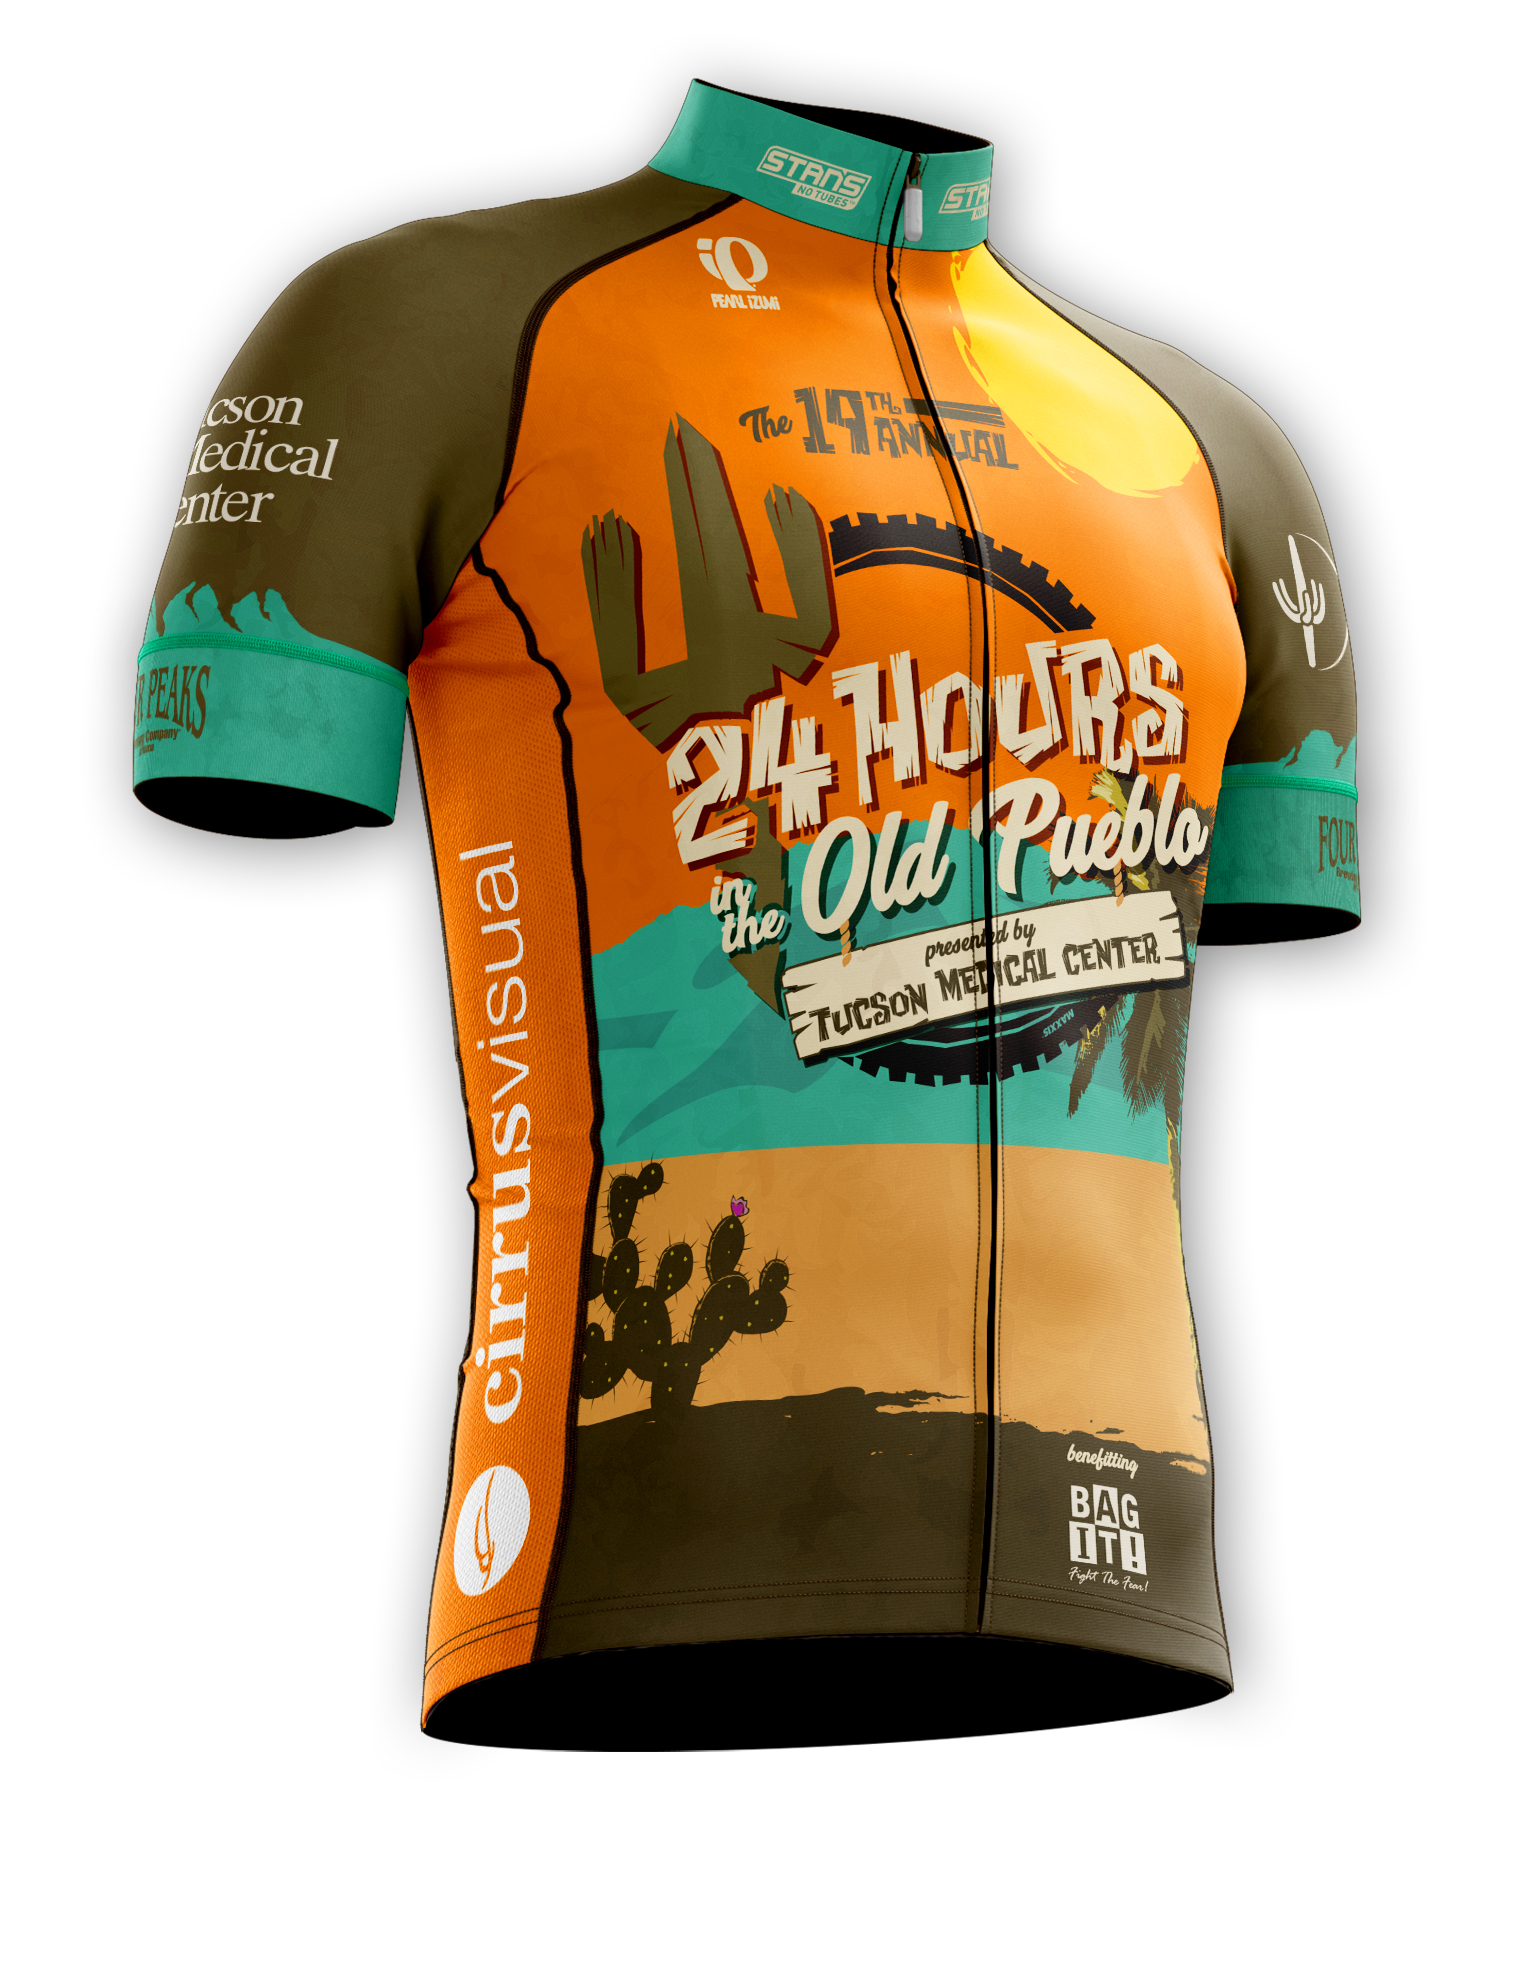 Download 50+ 3D Cycling Jersey Mockup Pictures Yellowimages - Free PSD Mockup Templates